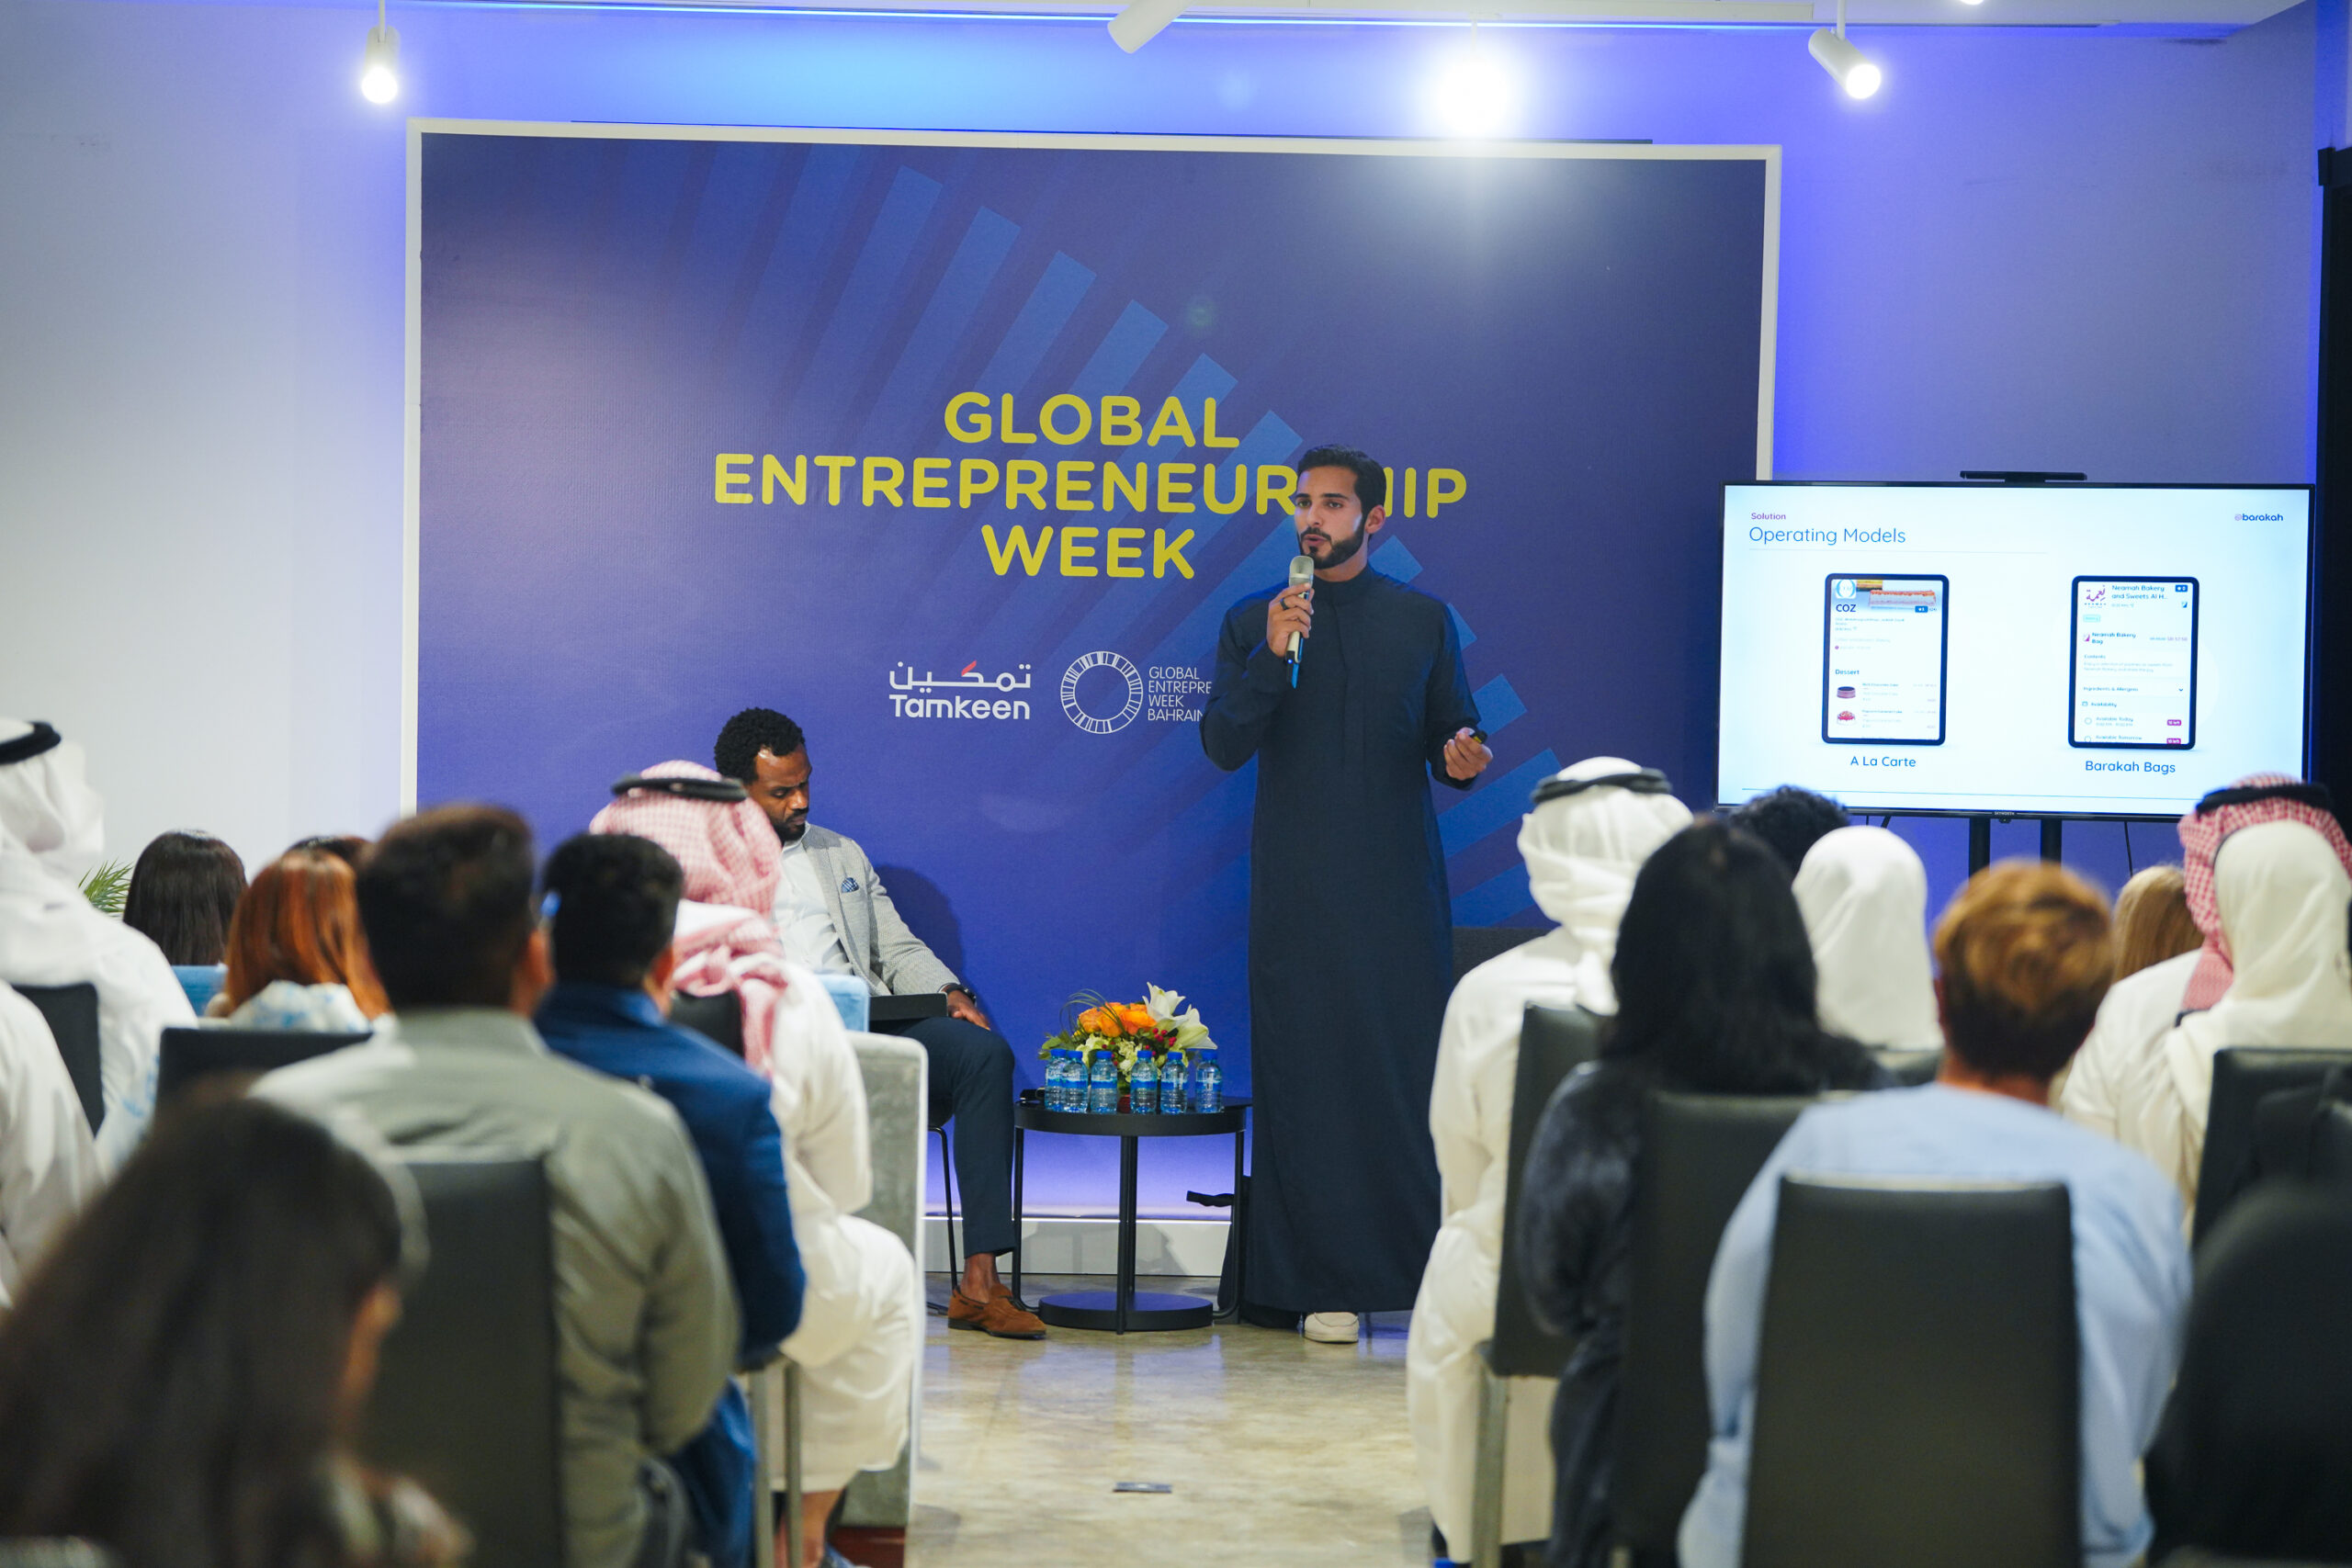 Tamkeen concludes the 6th edition of the Global Entrepreneurship Week with Huge Success With more than 50 leading speakers sharing expertise and insight across 35 events